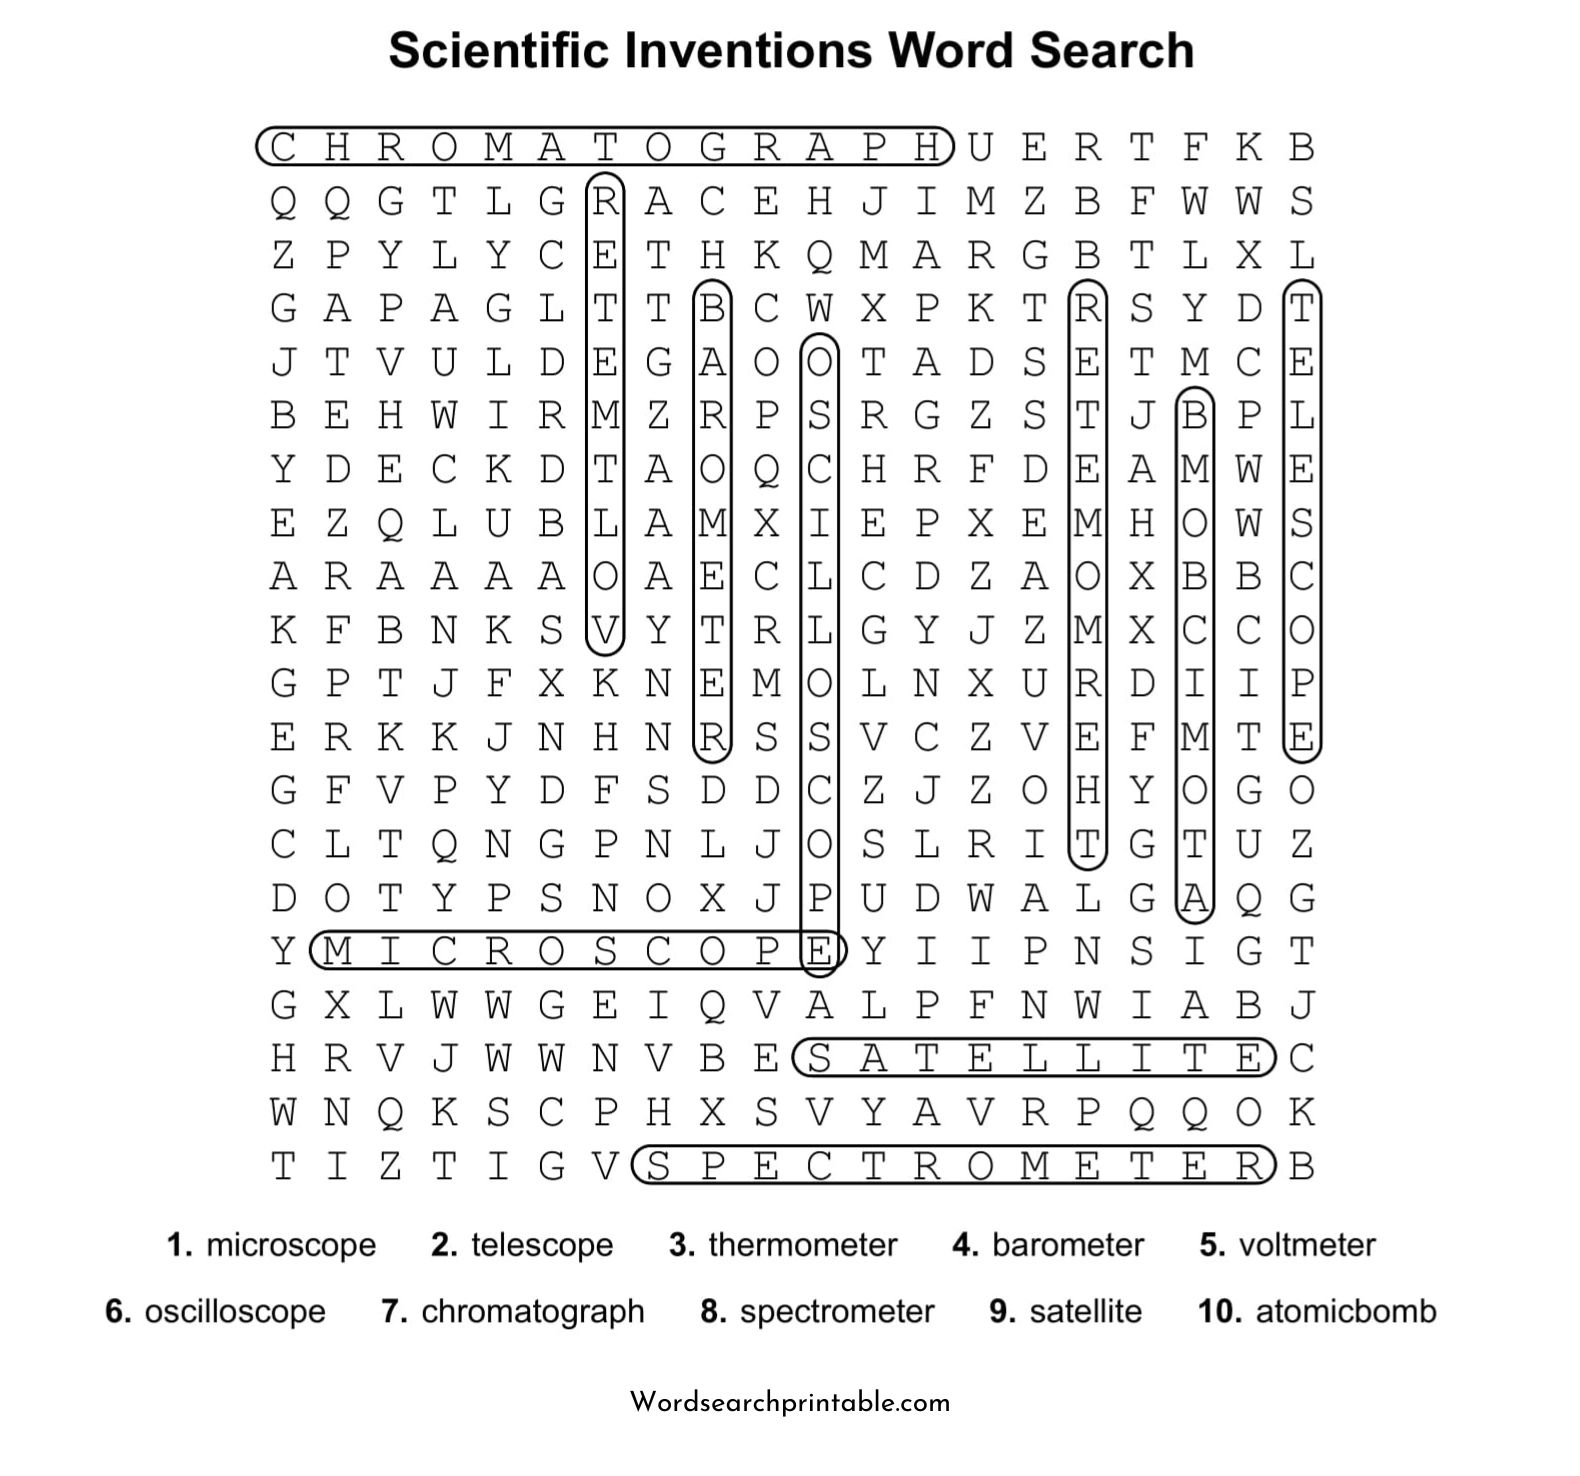 scientific inventions word search puzzle solution